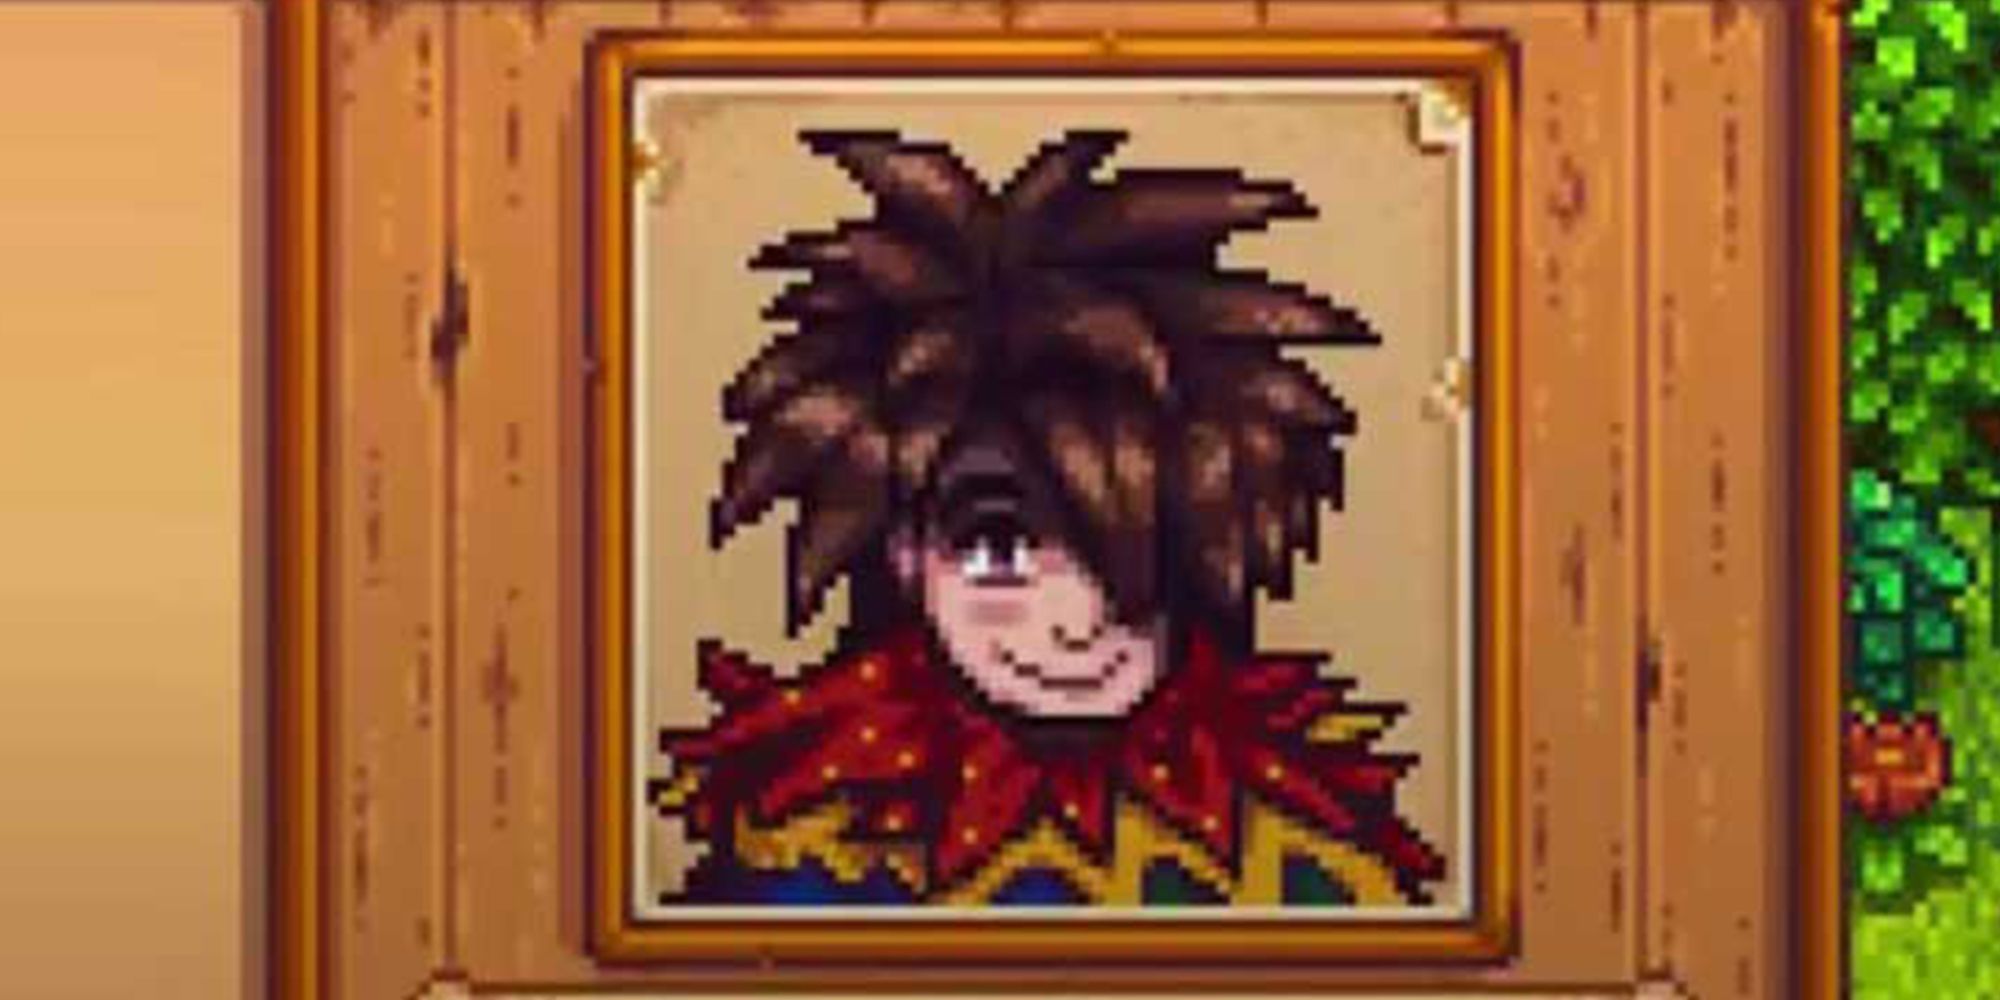 leo's character portrait from stardew valley